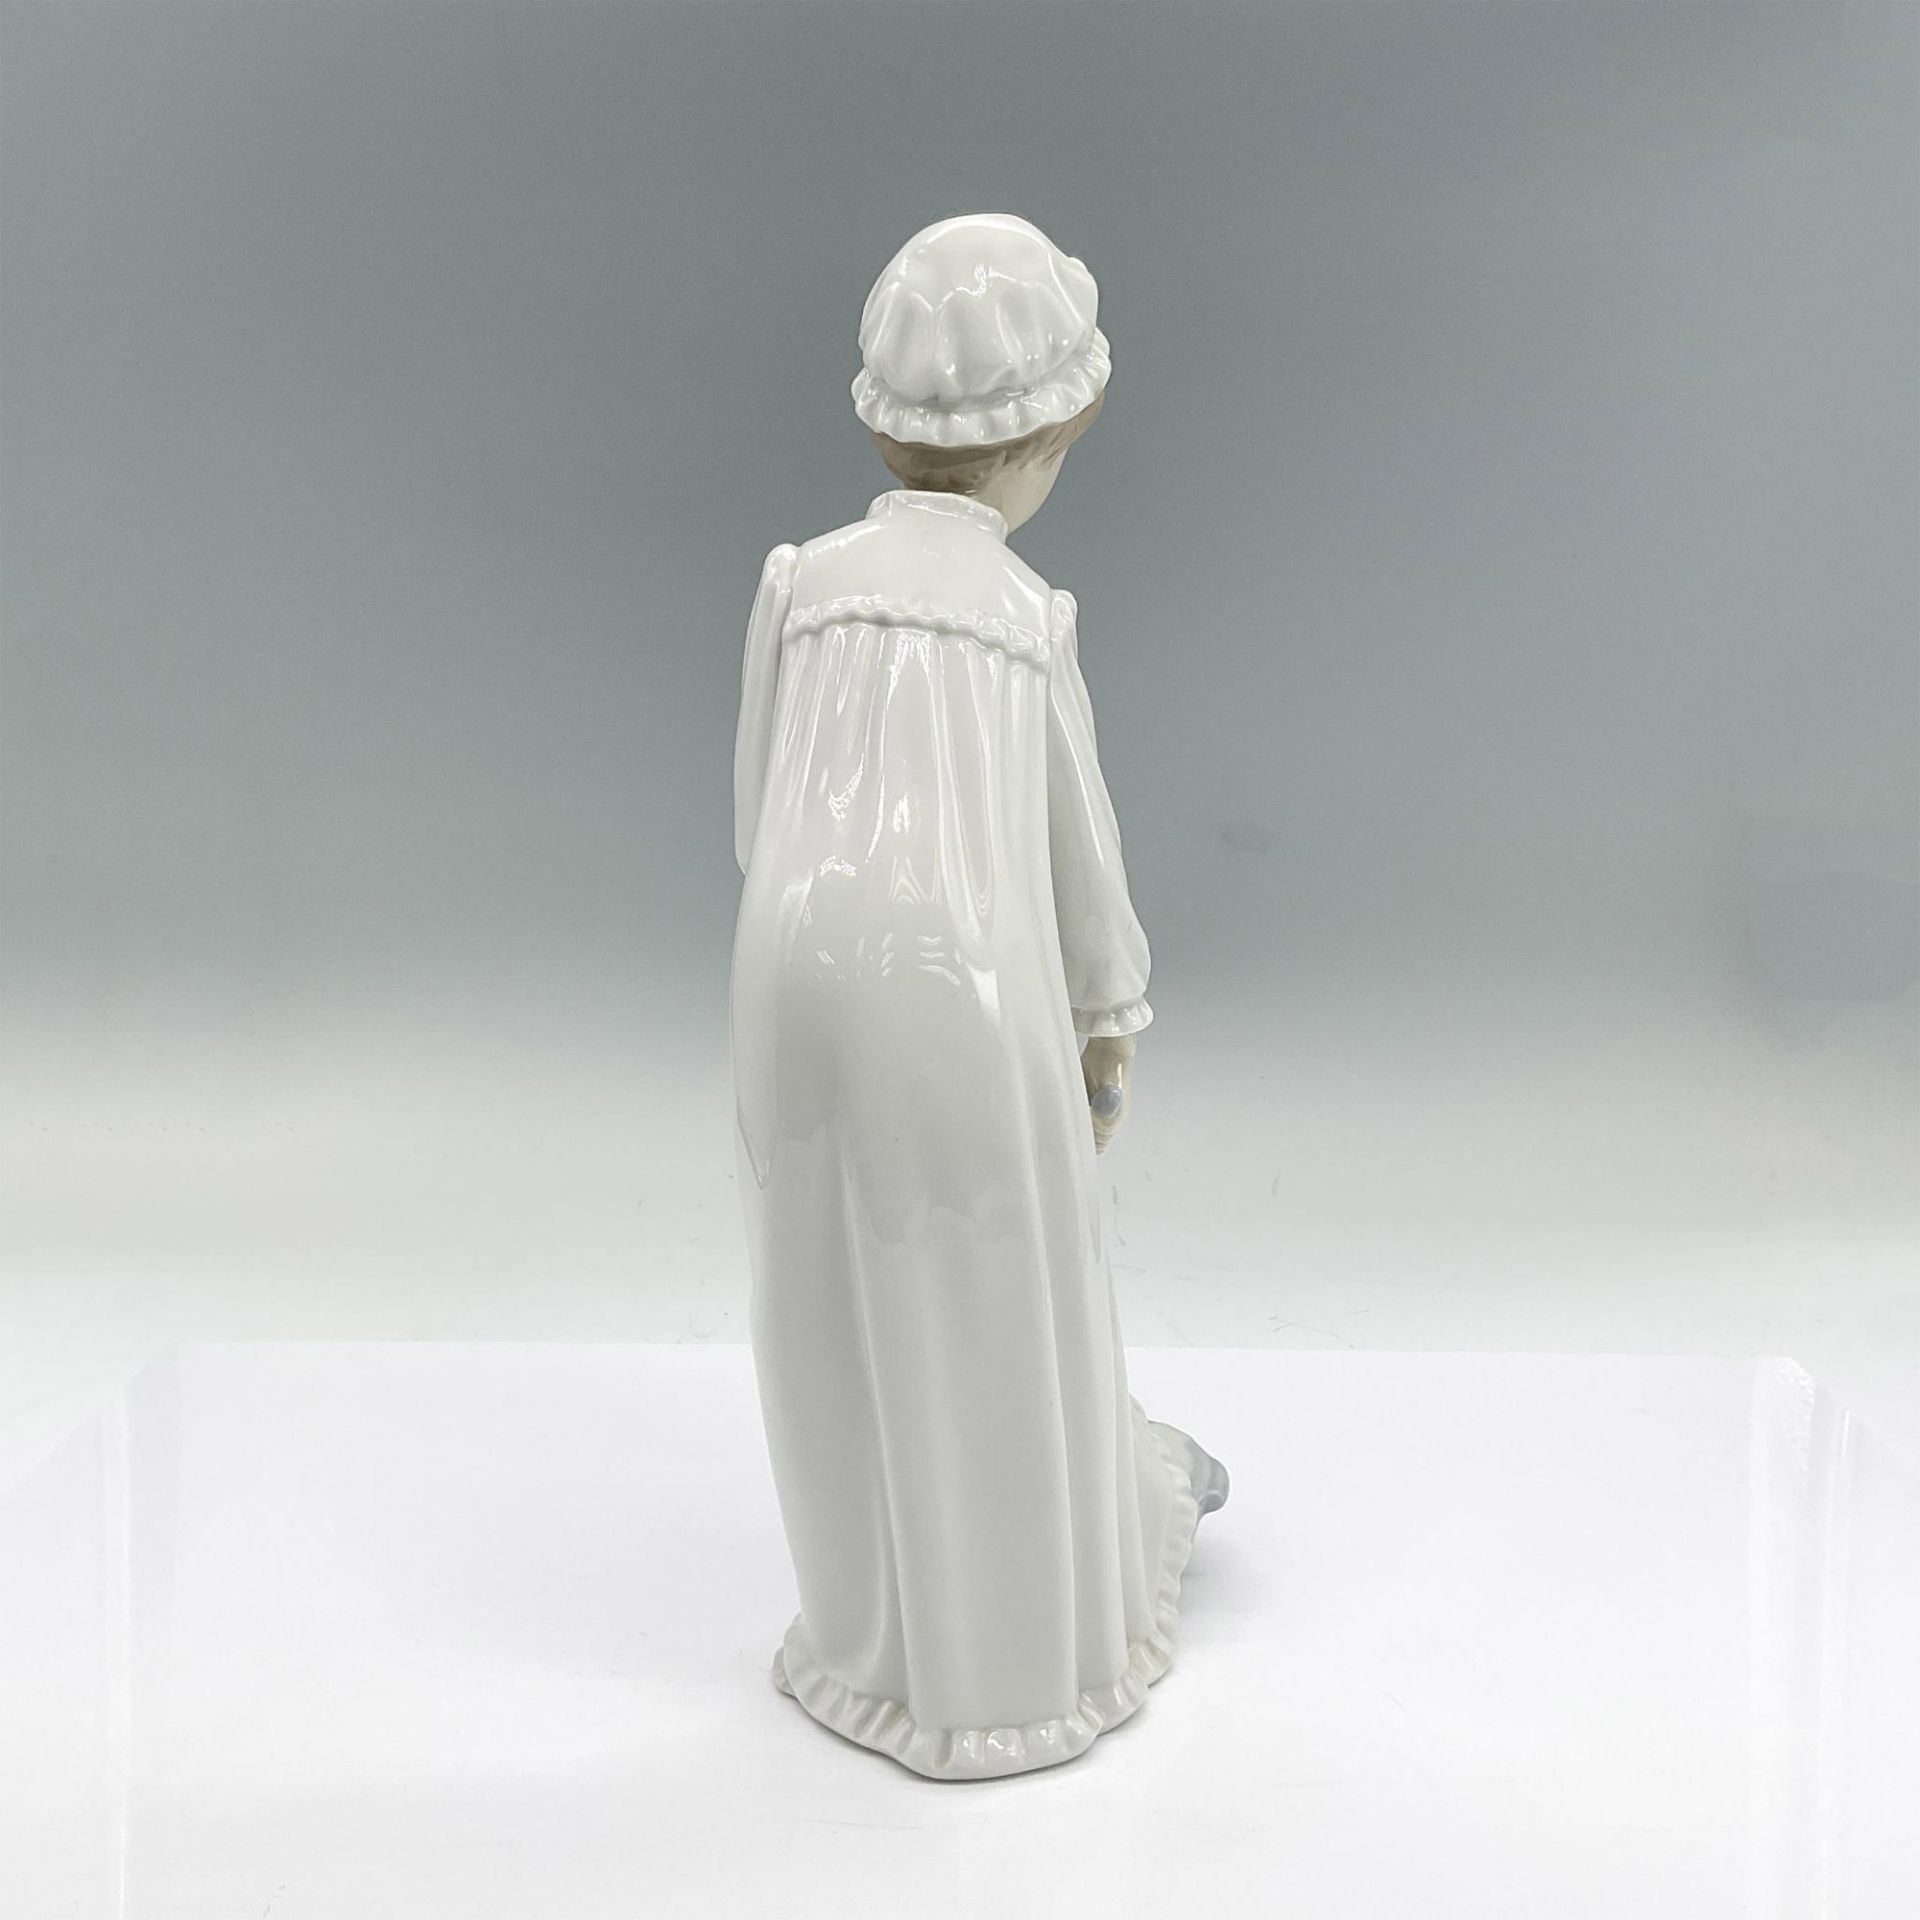 Nao By Lladro Porcelain Figurine, Girl In Nightgown - Image 2 of 3